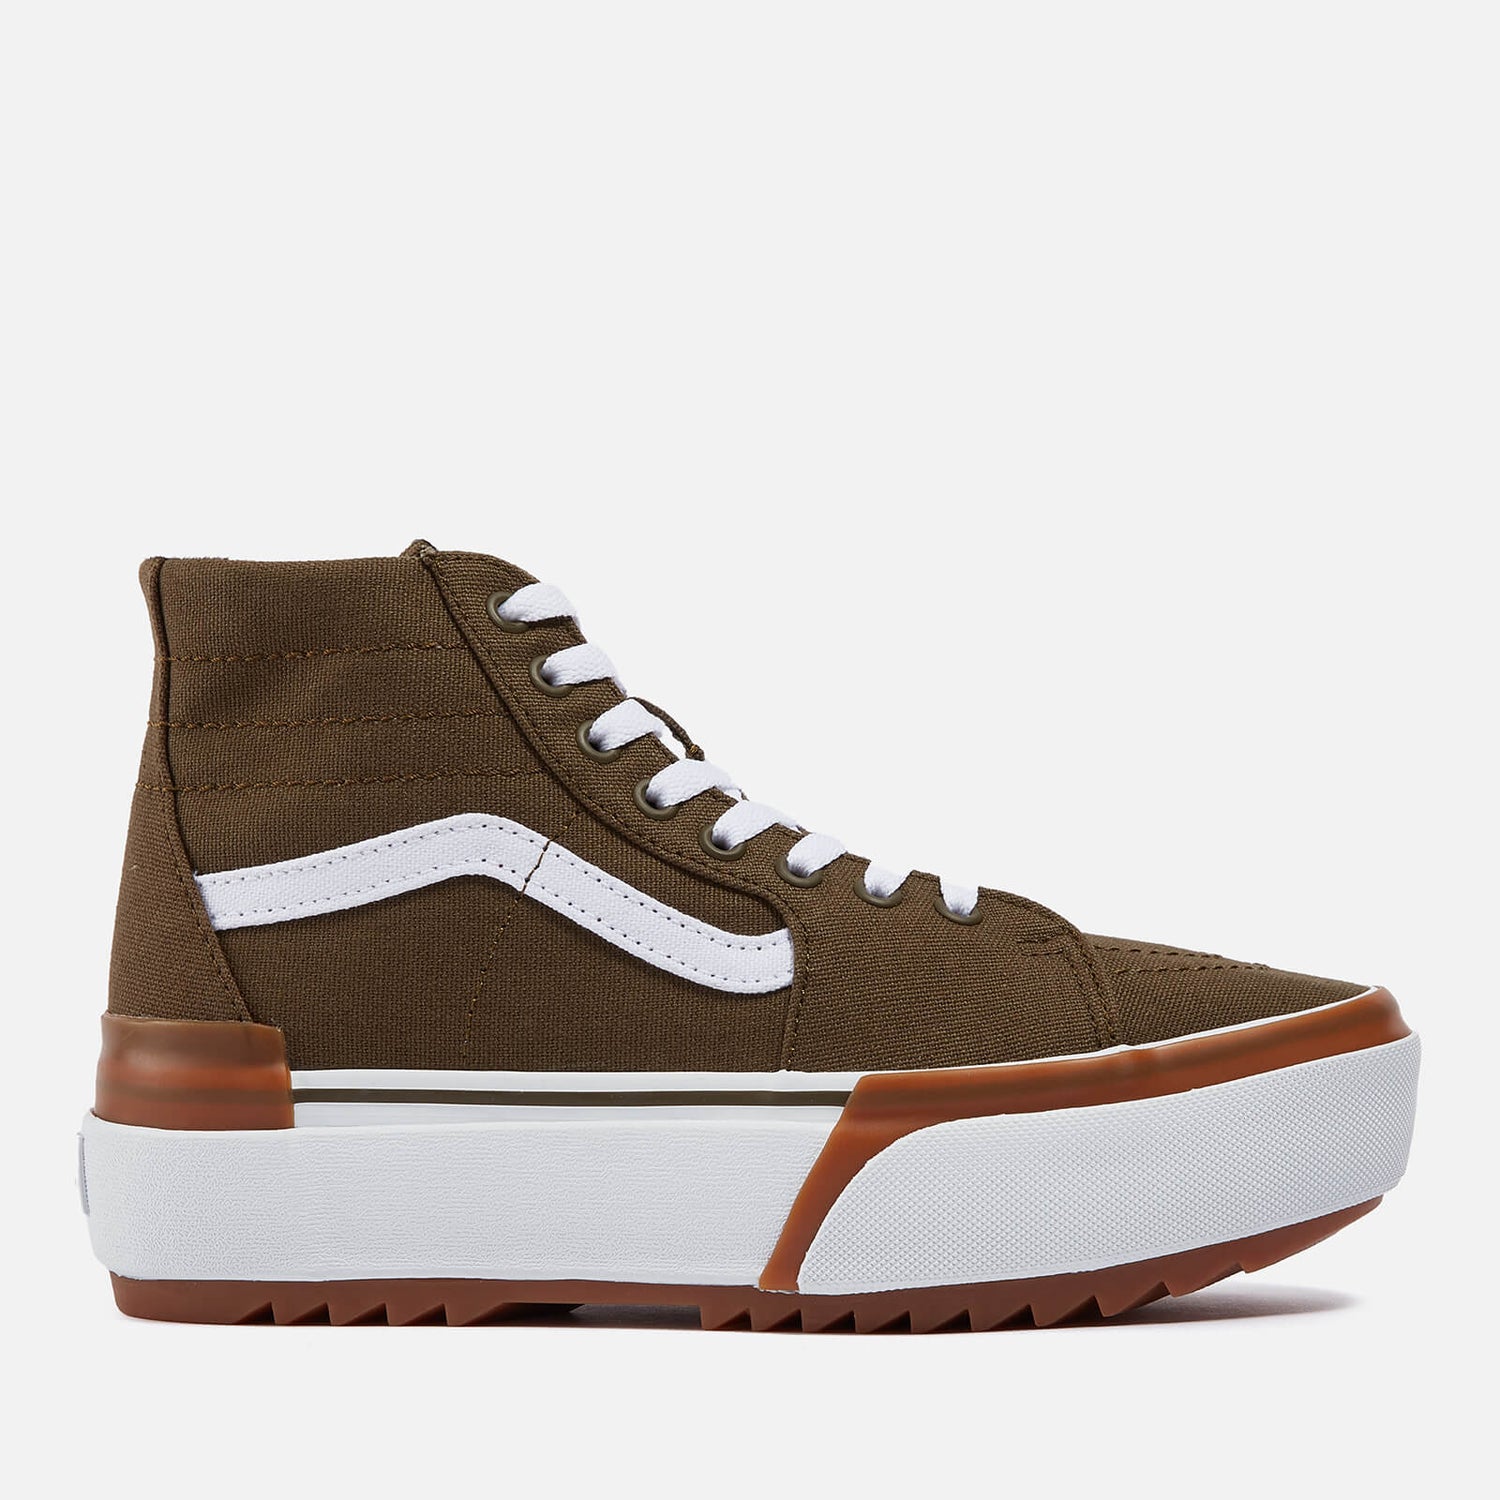 Vans Women's Canvas Sk8-Hi Stacked Canvas Trainers - 3